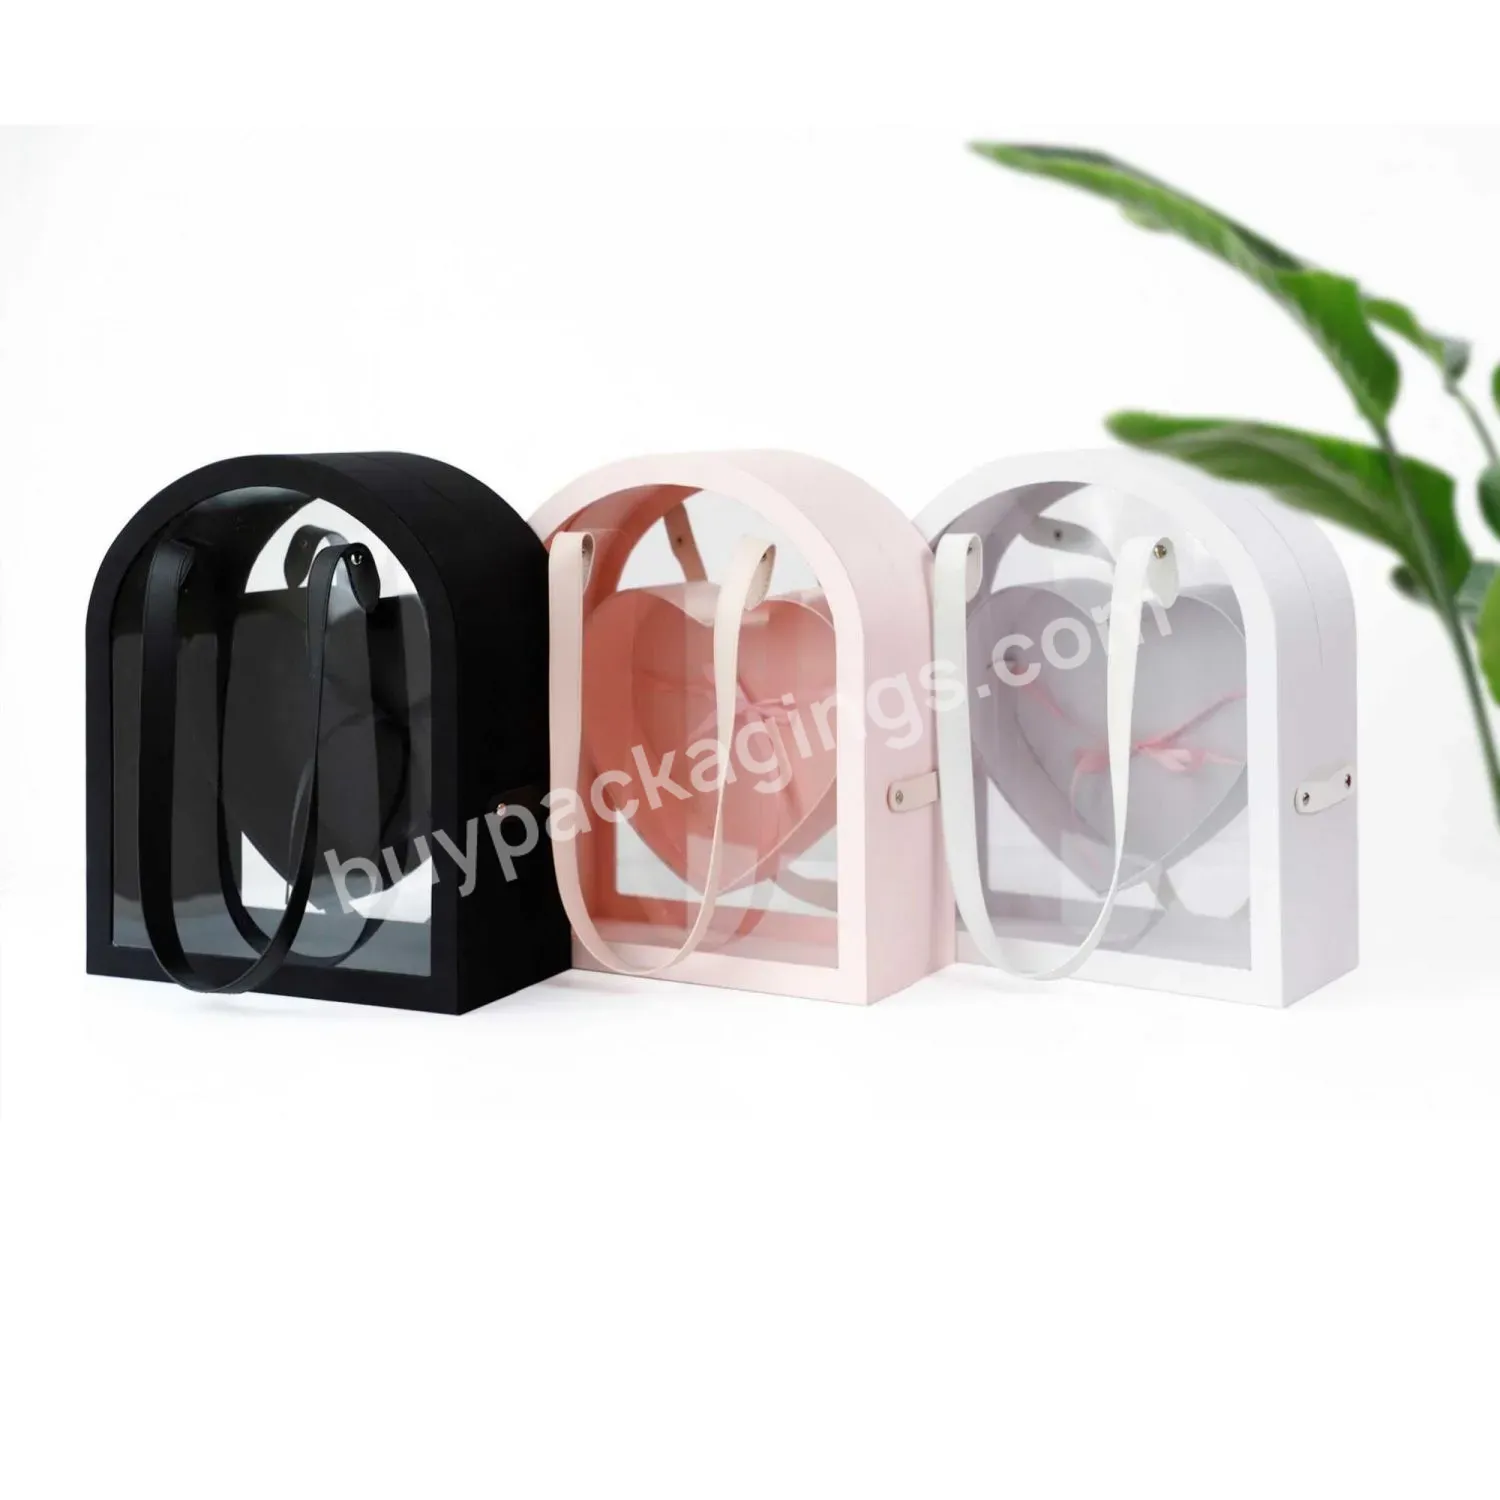 Elegant Leather Portable Flower Box Heart Shaped Slotted Box With Leather Lever Handle - Buy Leather Portable Flower Box,Heart Shaped Slotted Box,Box With Leather Lever Handle.